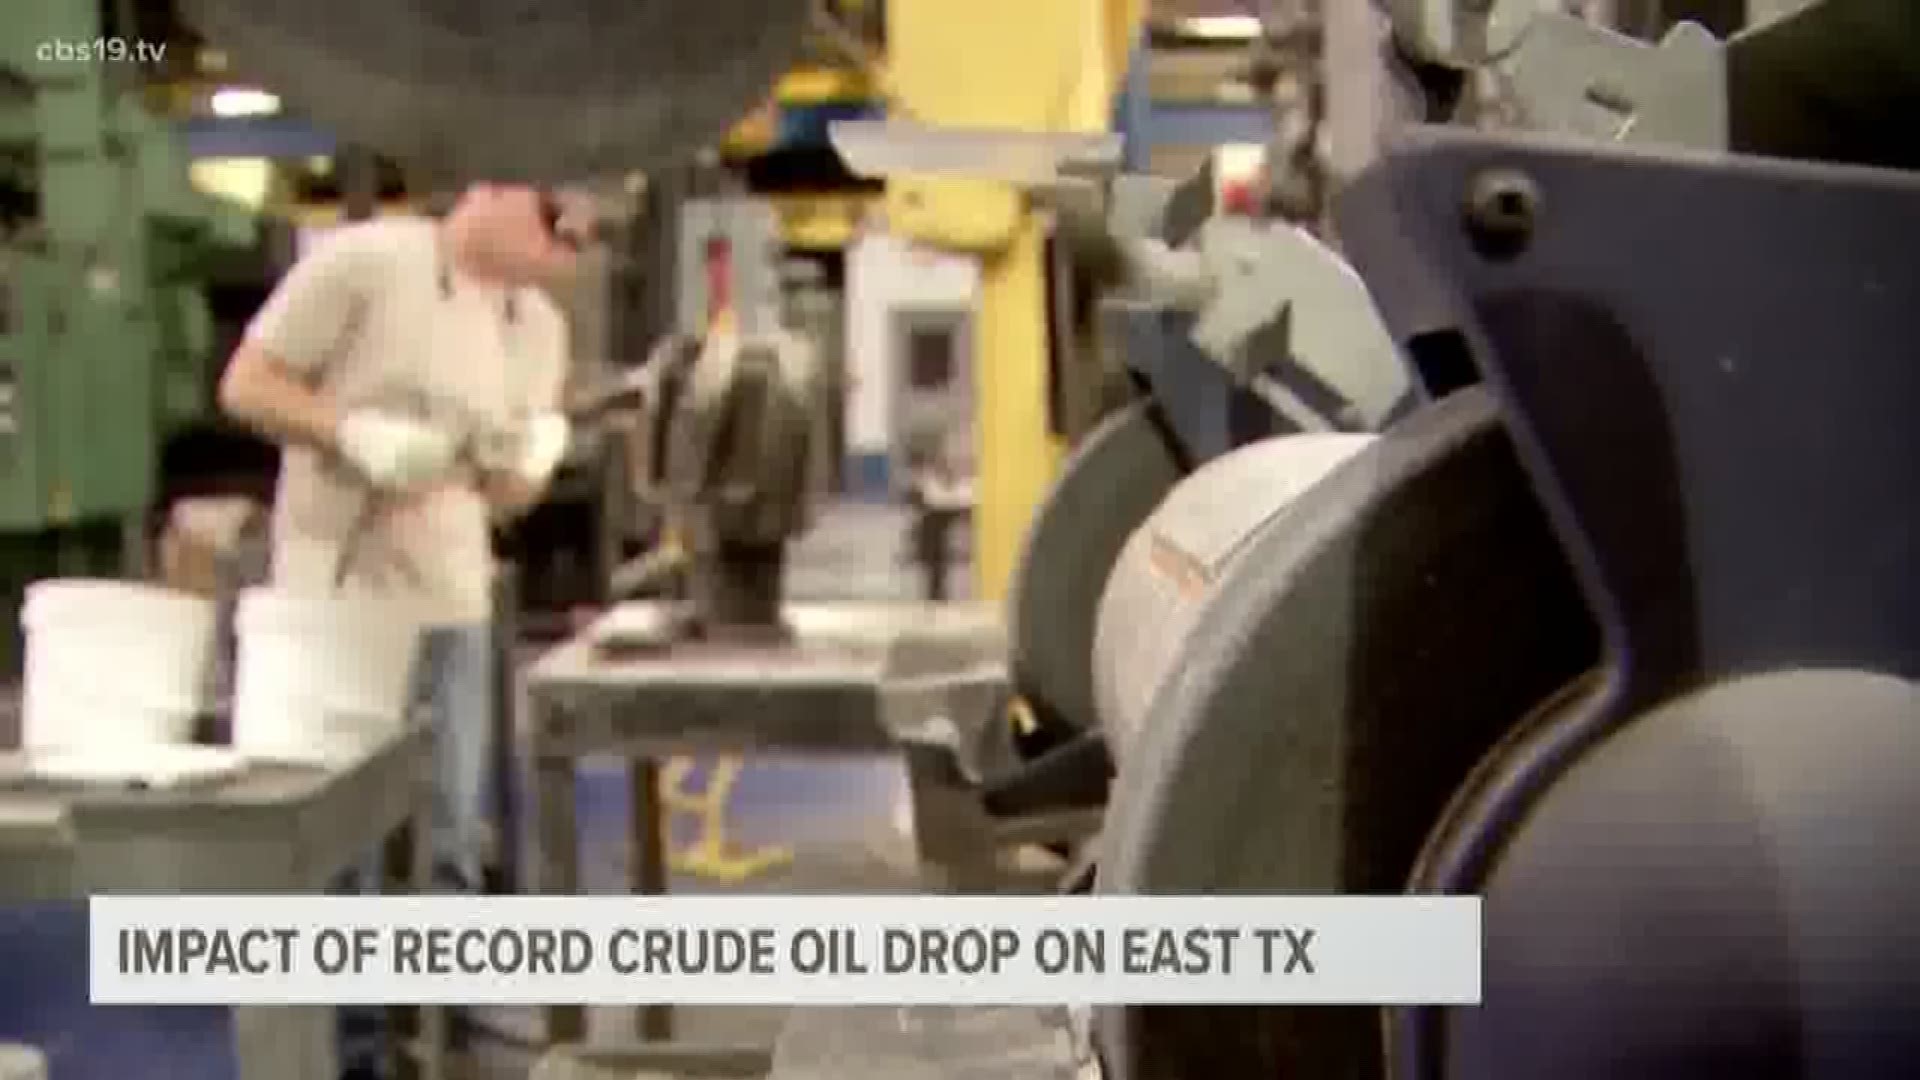 While Monday was unprecedented for the oil industry. However, the prospects for East Texas are not all bad.